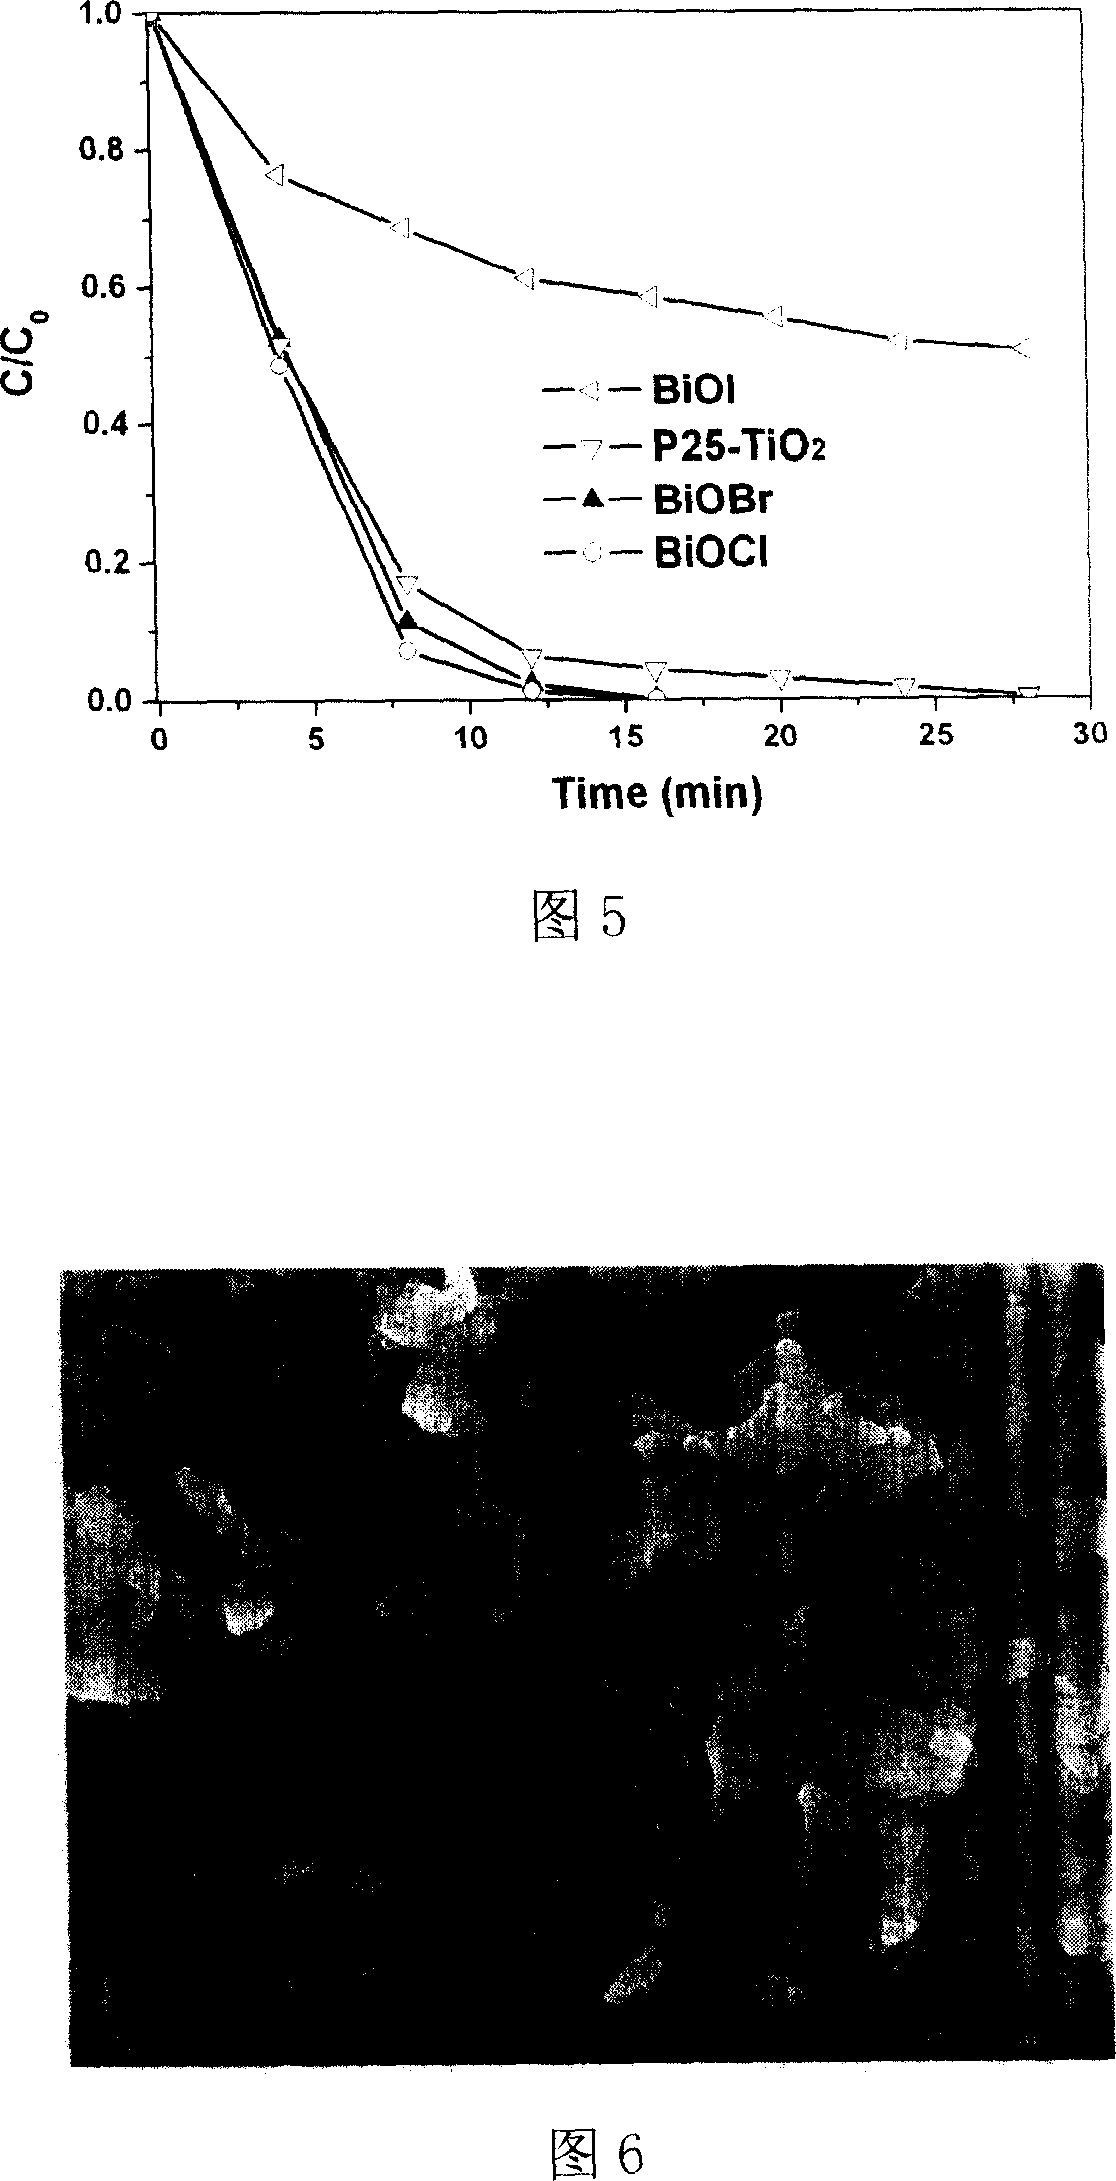 Use of bismuth oxyhalide